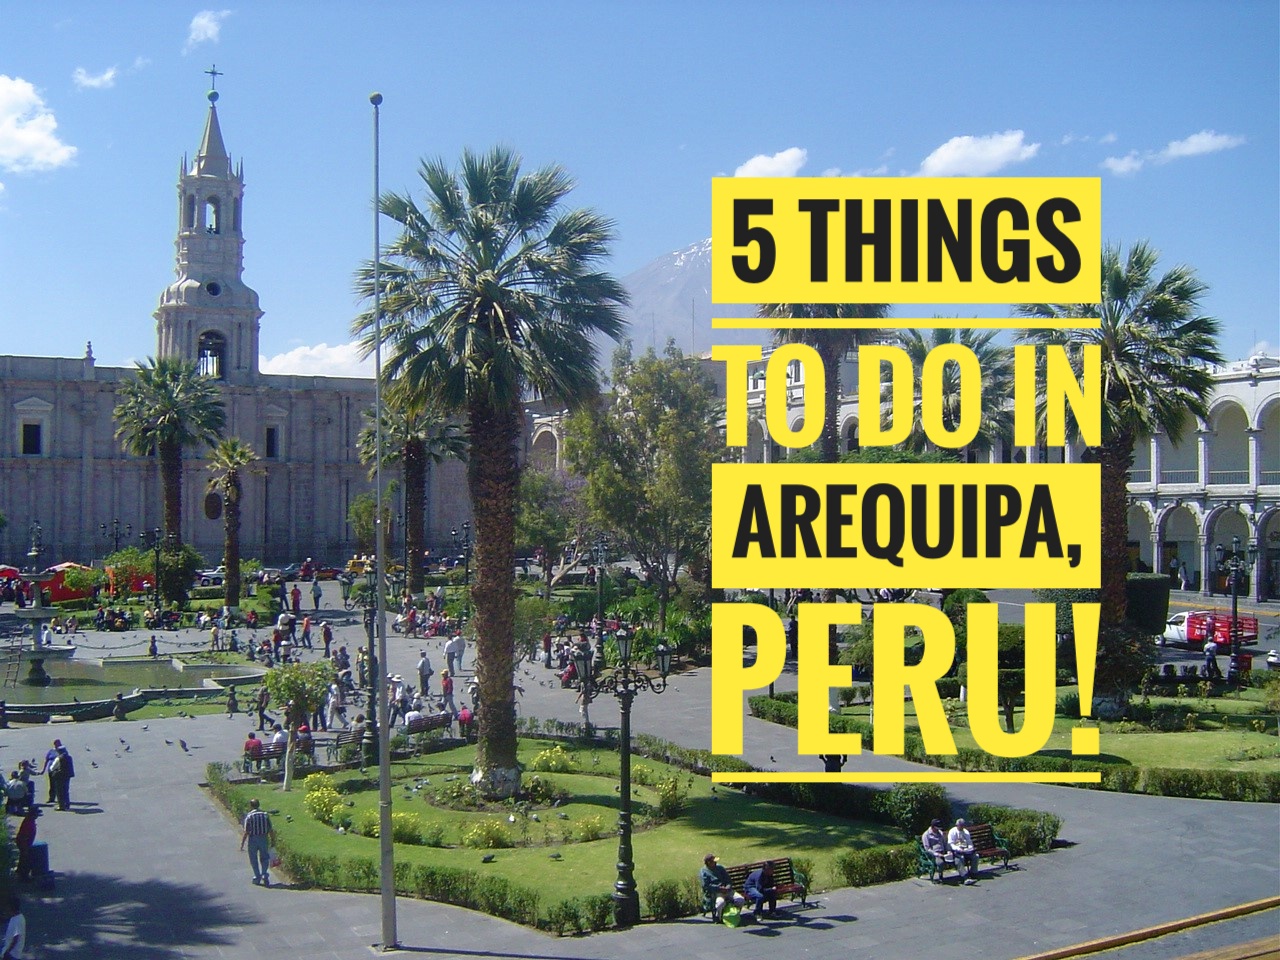 5 Things to do in Arequipa, Peru!